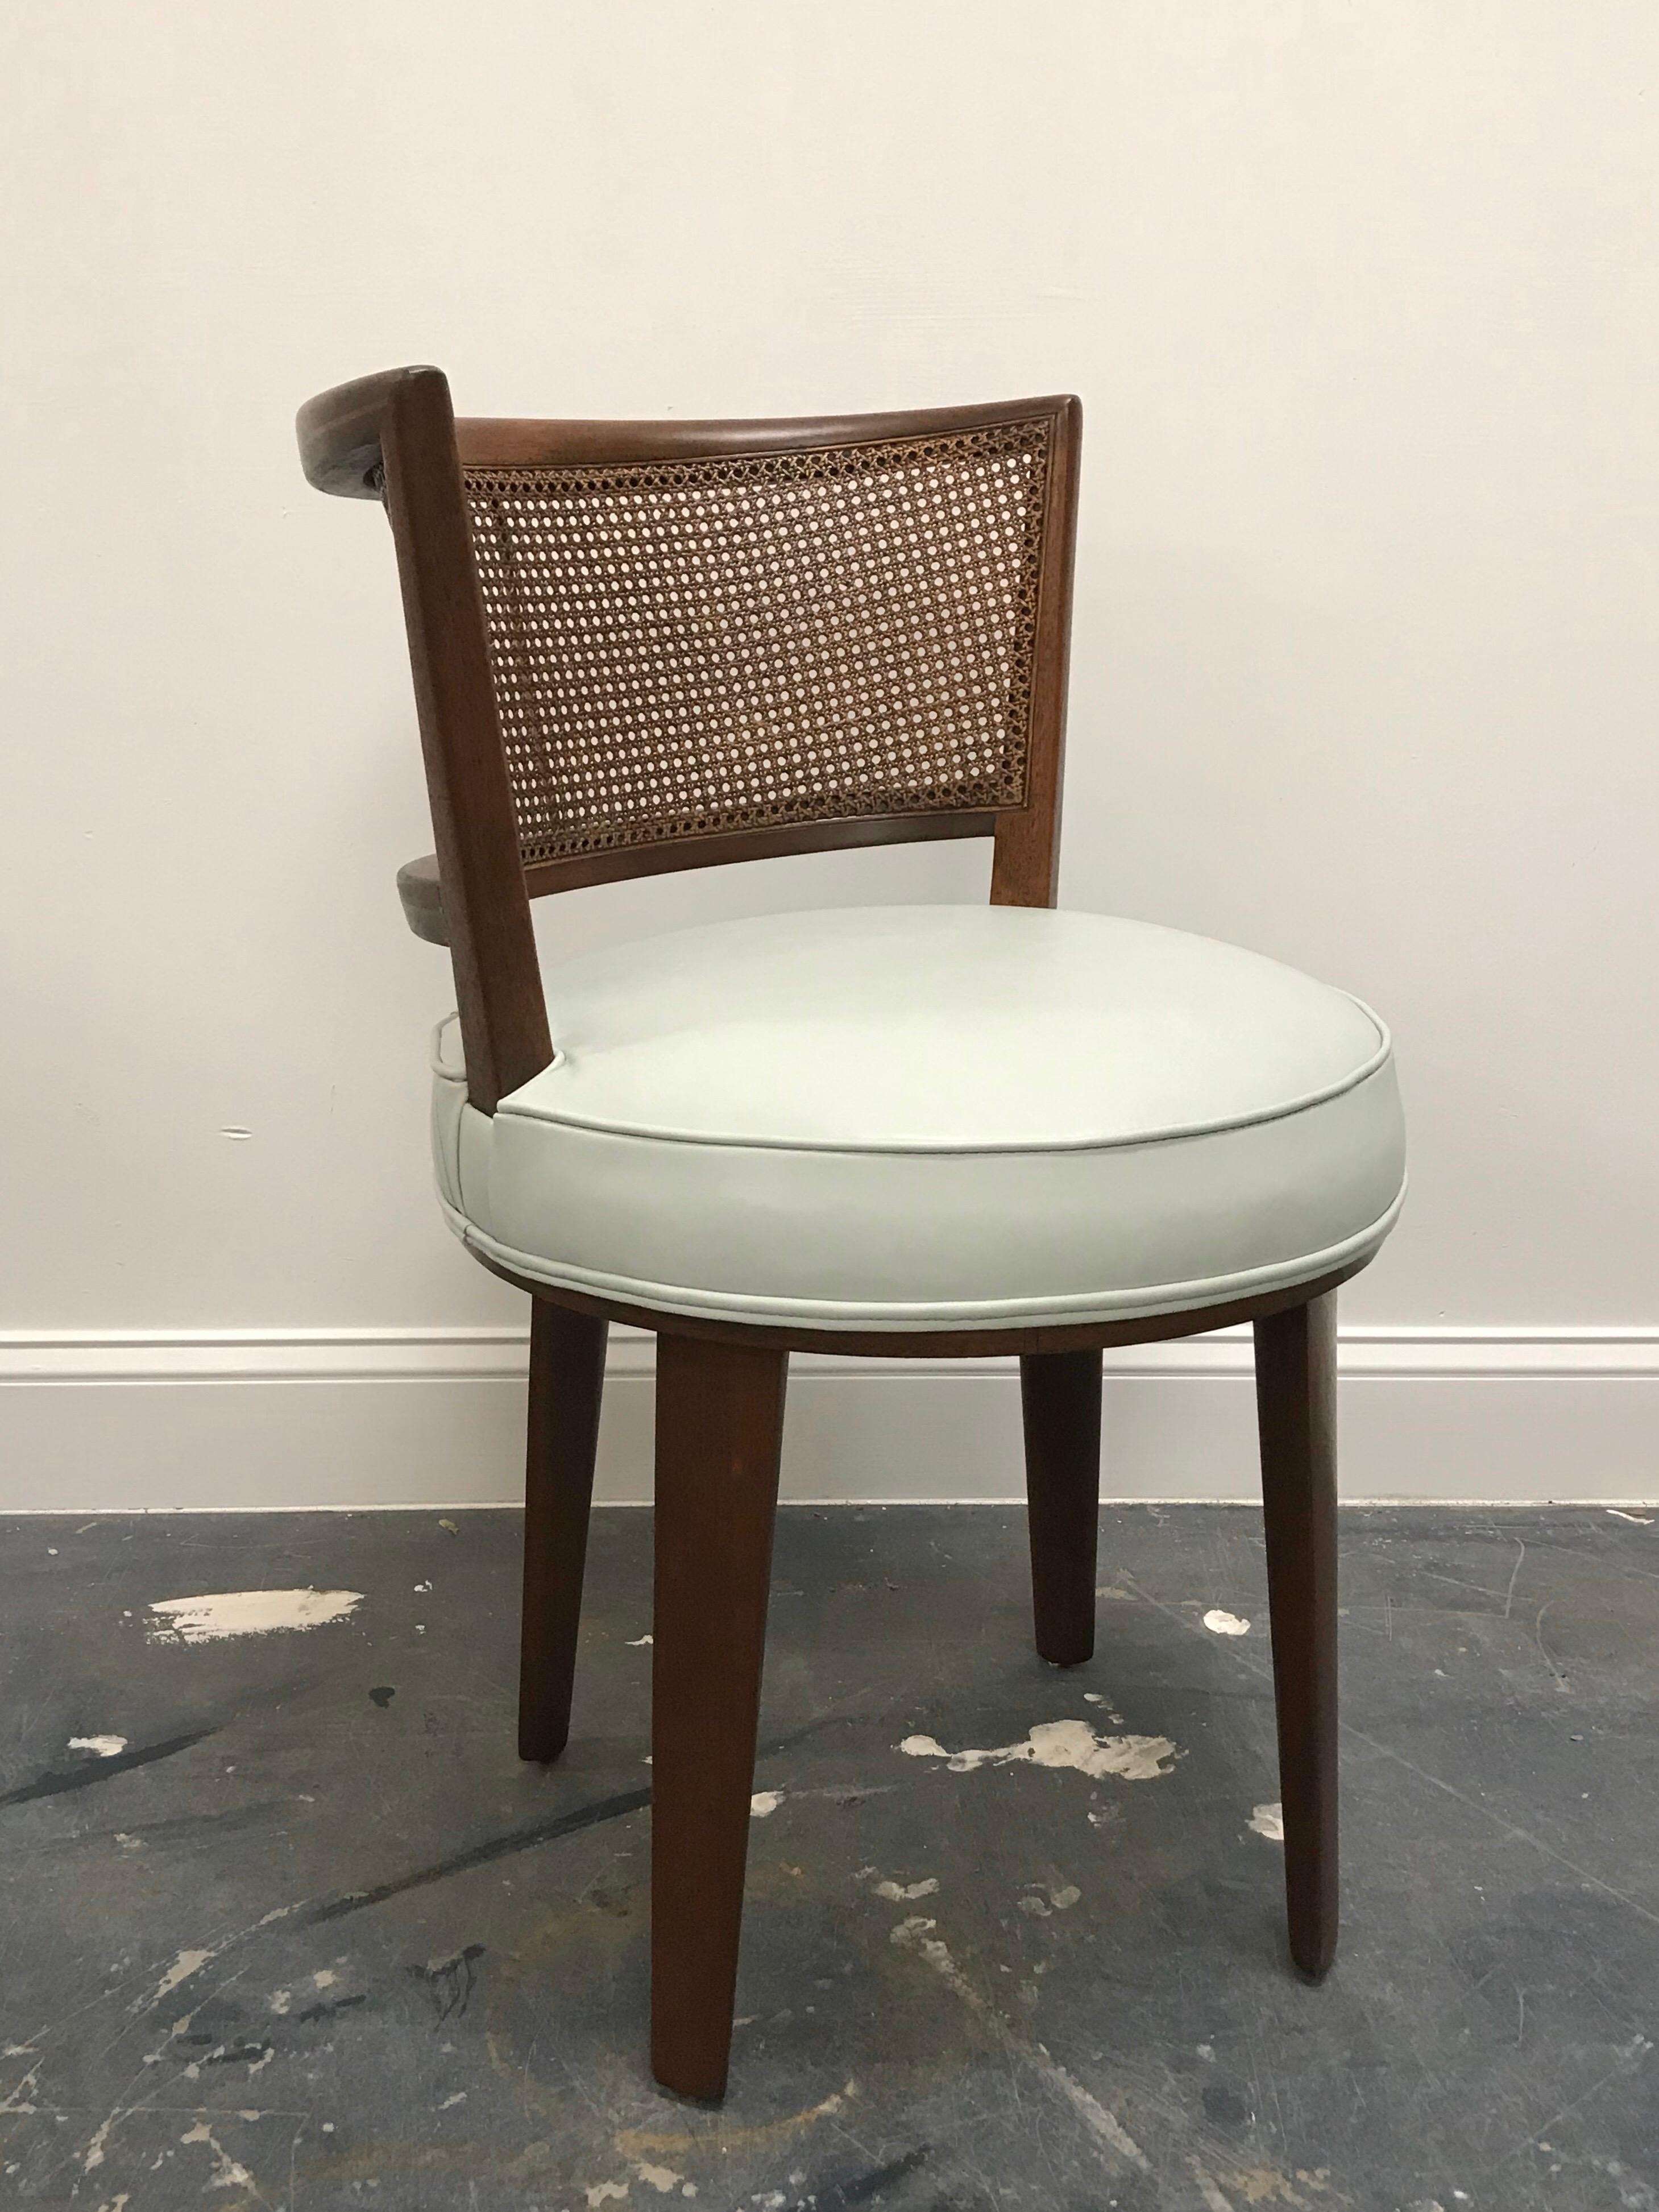 Rare and exceptional vanity or accent chair by Edward Wormley for Dunbar. Chair feature a mahogany frame, cane back, and leather seat. Leather is an off-white/ light blue, there is a very faint mark on the seat, which could be an inconsistency in